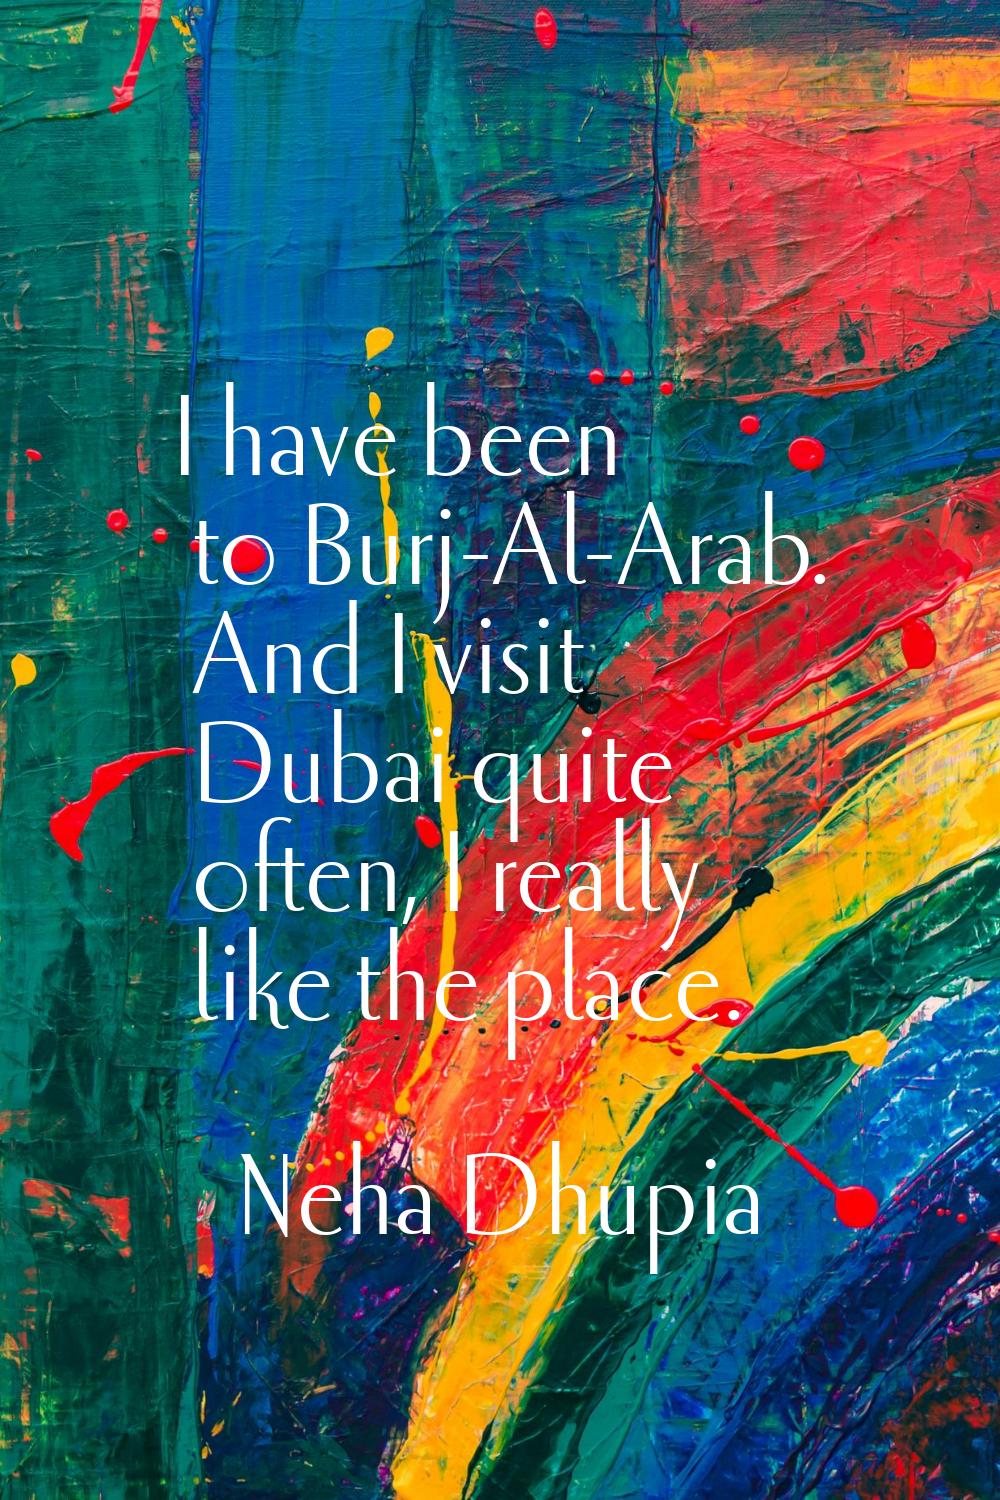 I have been to Burj-Al-Arab. And I visit Dubai quite often, I really like the place.